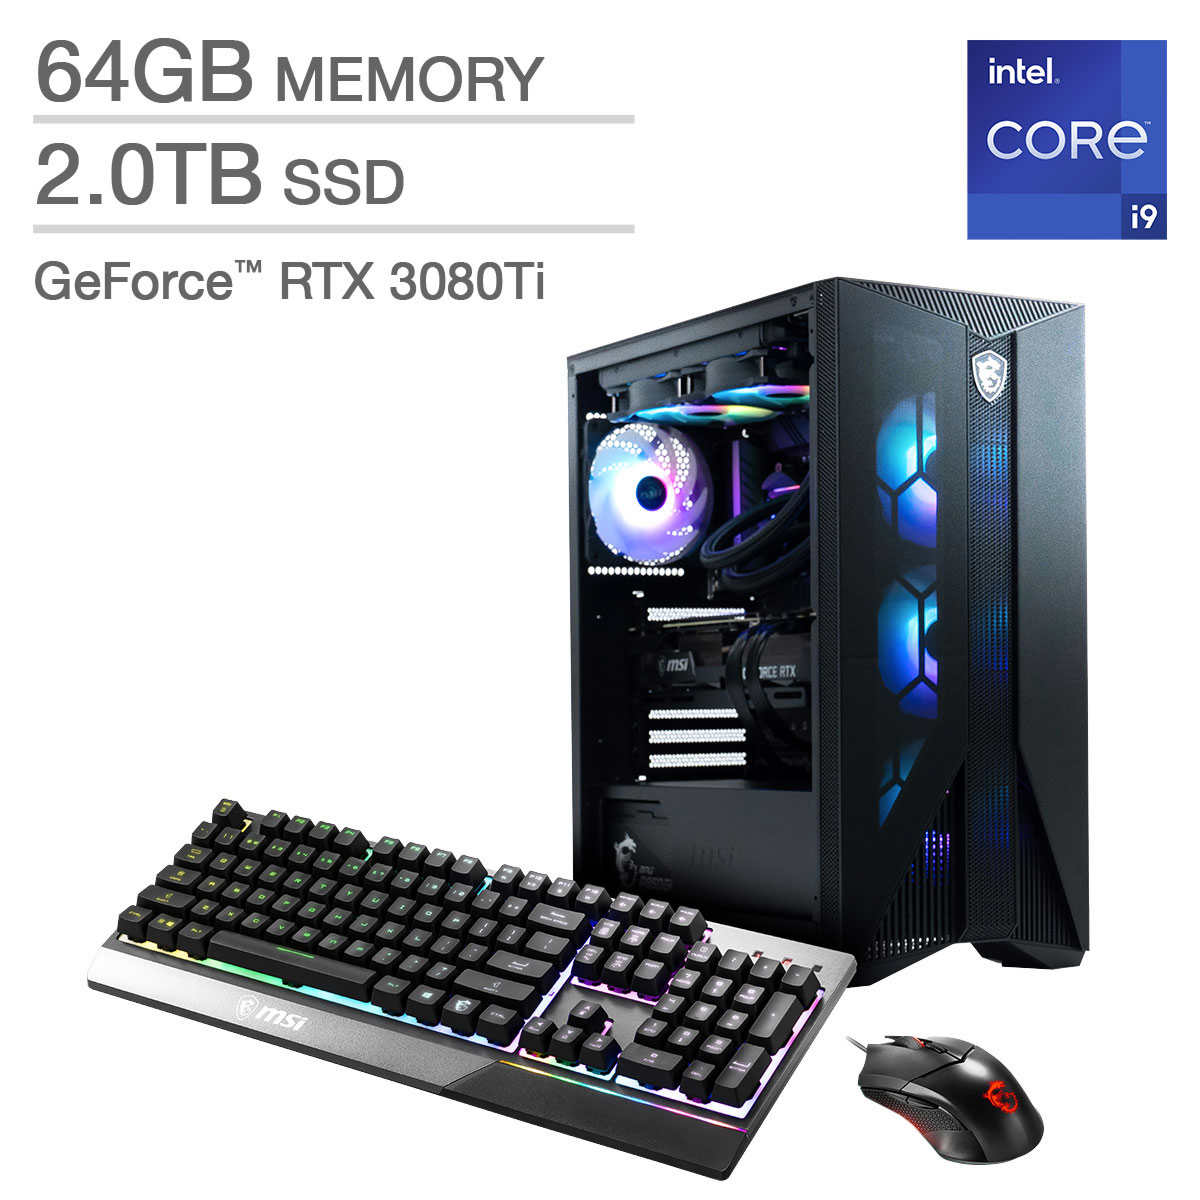 MSI Aegis RS Gaming Desktop - Intel Core i9-12900KF -  GeForce RTX 3080Ti 500$ Costco gift card for 3k+ purchases brings to $3099 ($3599.99 includes $500 Costco Shop Card)